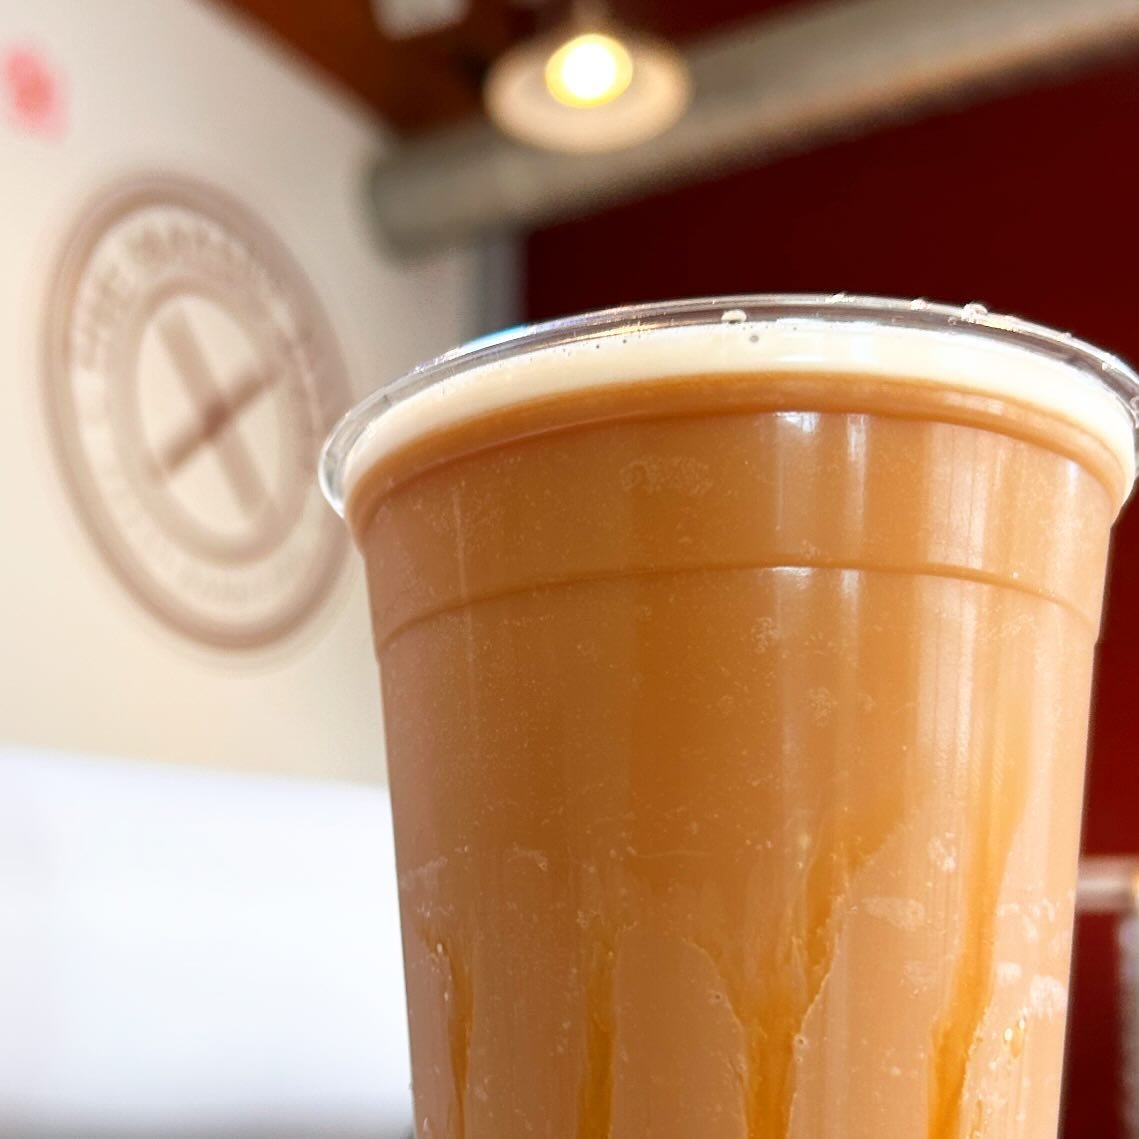 Dark chocolate &amp; caramel come together in our nitro coffee as part of the spring specials at the Baker&rsquo;s Mark. 
-
#freshbakedsubs
-
#pdxeats #pdxnow #eatpdx #hereforportland #pdxcoffee #seportland #nwportland #eaterpdx